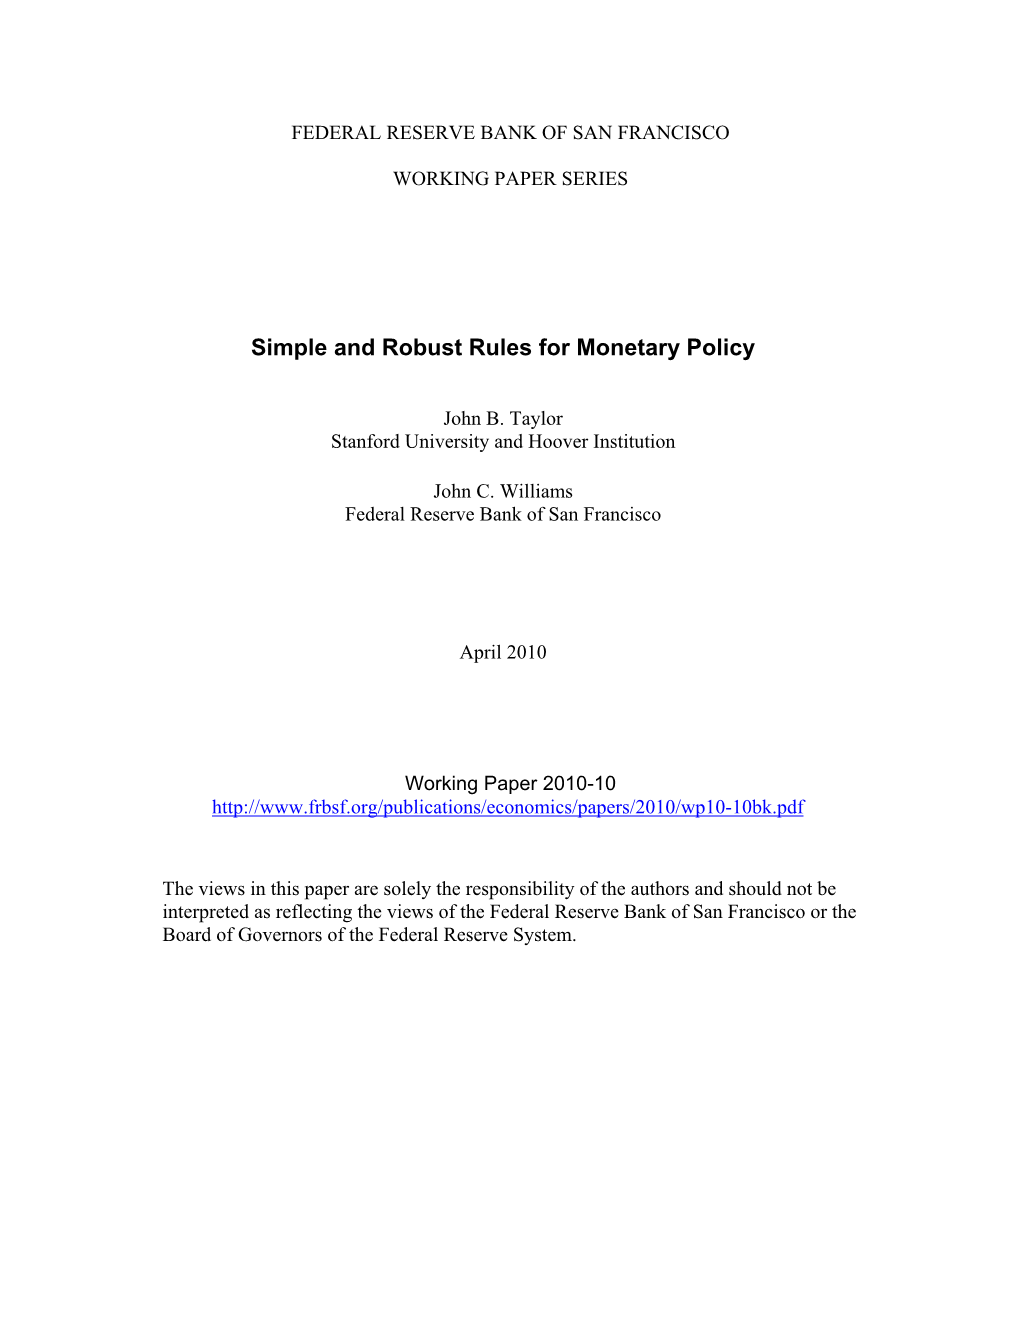 Simple and Robust Rules for Monetary Policy